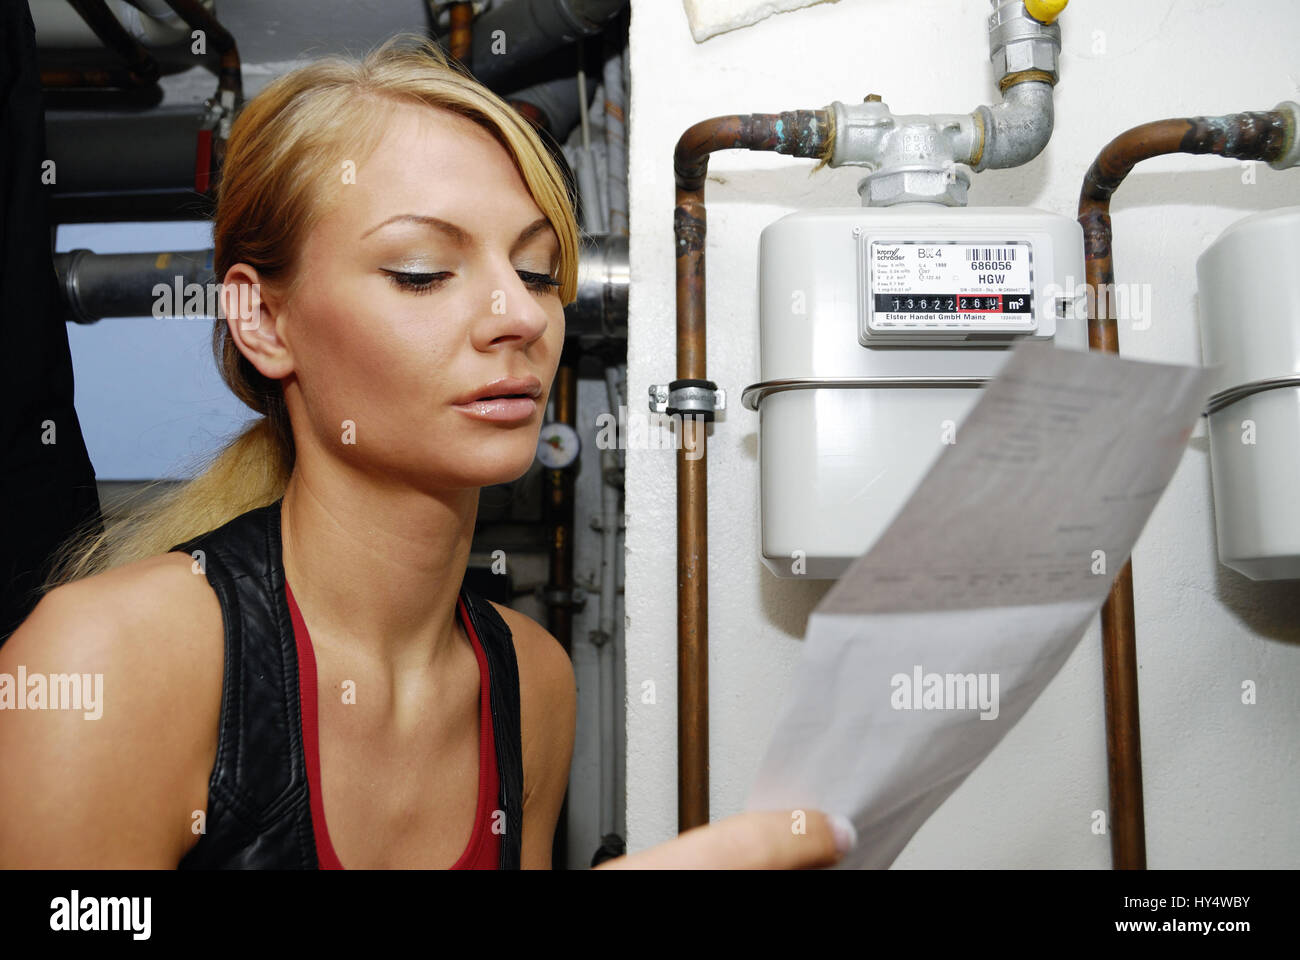 Young woman with heating costs account in the gas metre, Junge Frau mit Heizkostenabrechnung am Gaszaehler Stock Photo